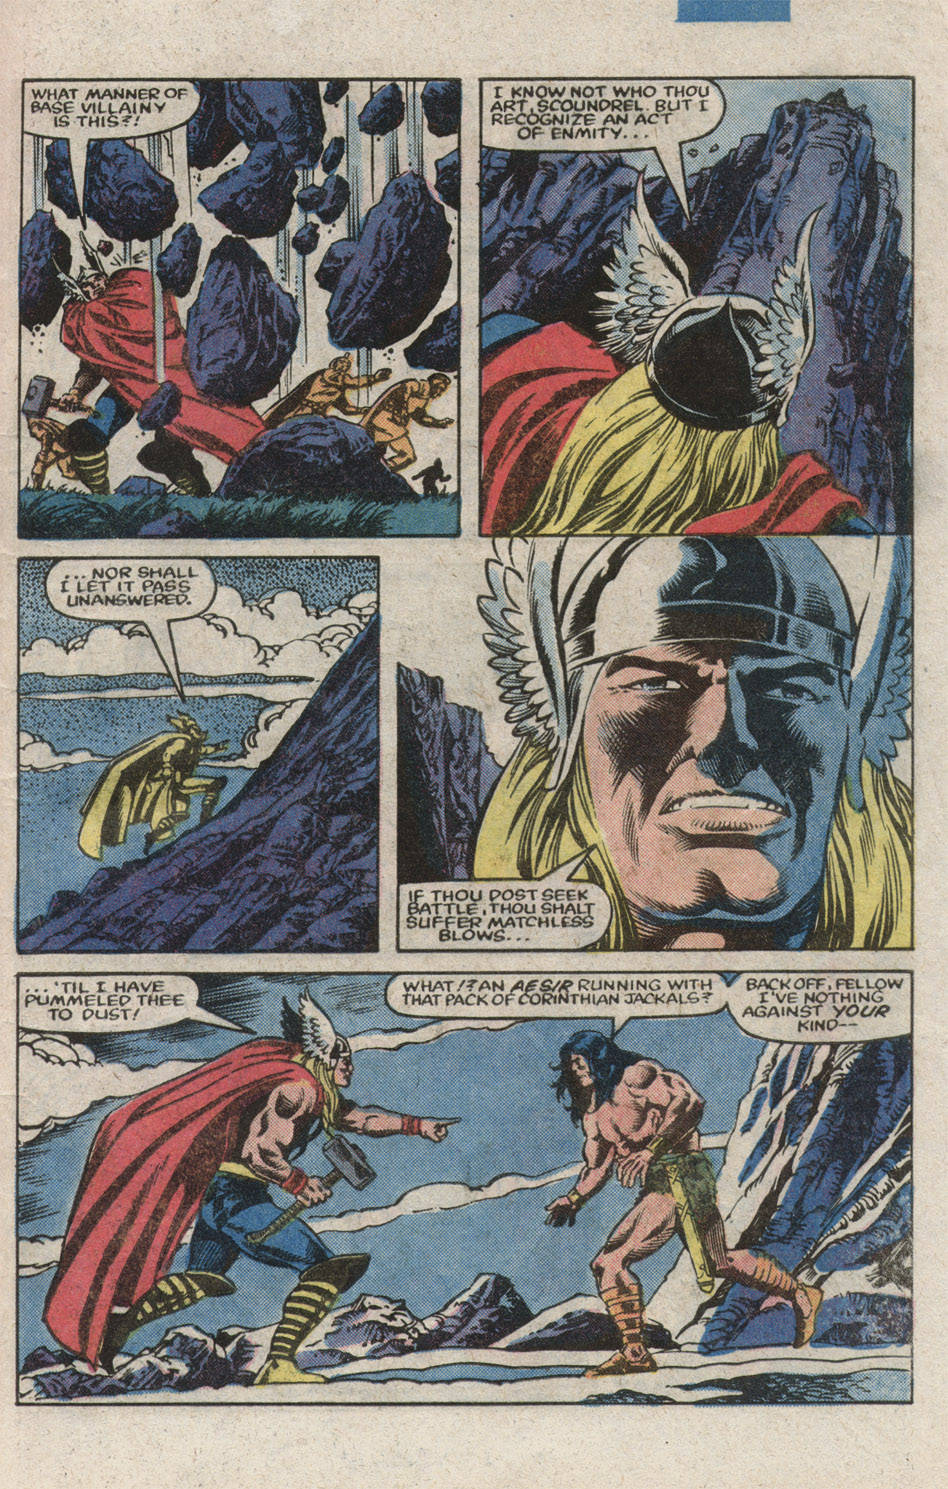 What If? (1977) issue 39 - Thor battled conan - Page 9